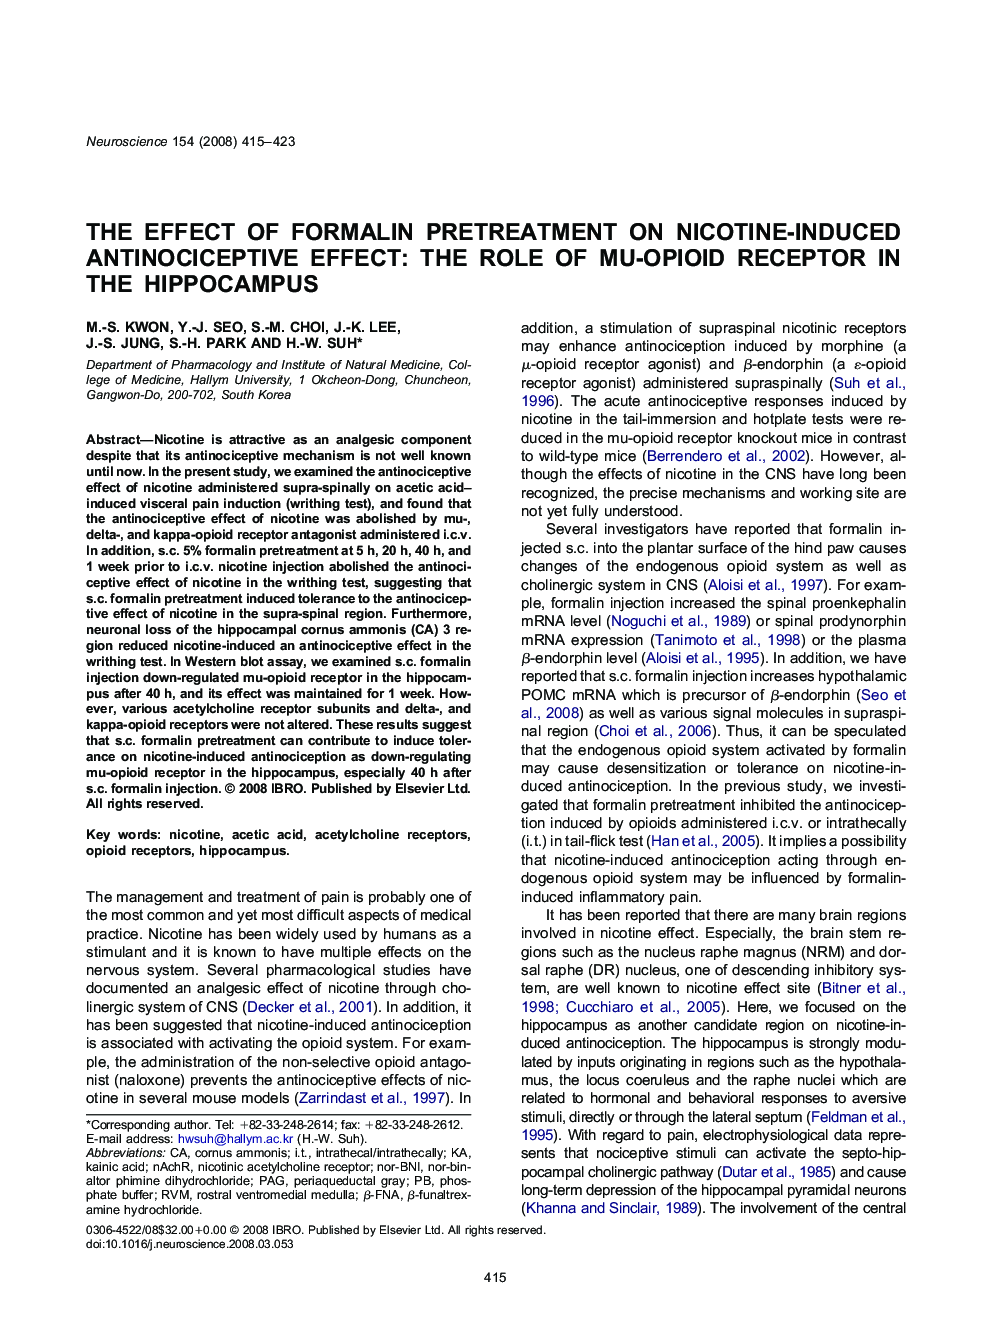 The effect of formalin pretreatment on nicotine-induced antinociceptive effect: The role of mu-opioid receptor in the hippocampus